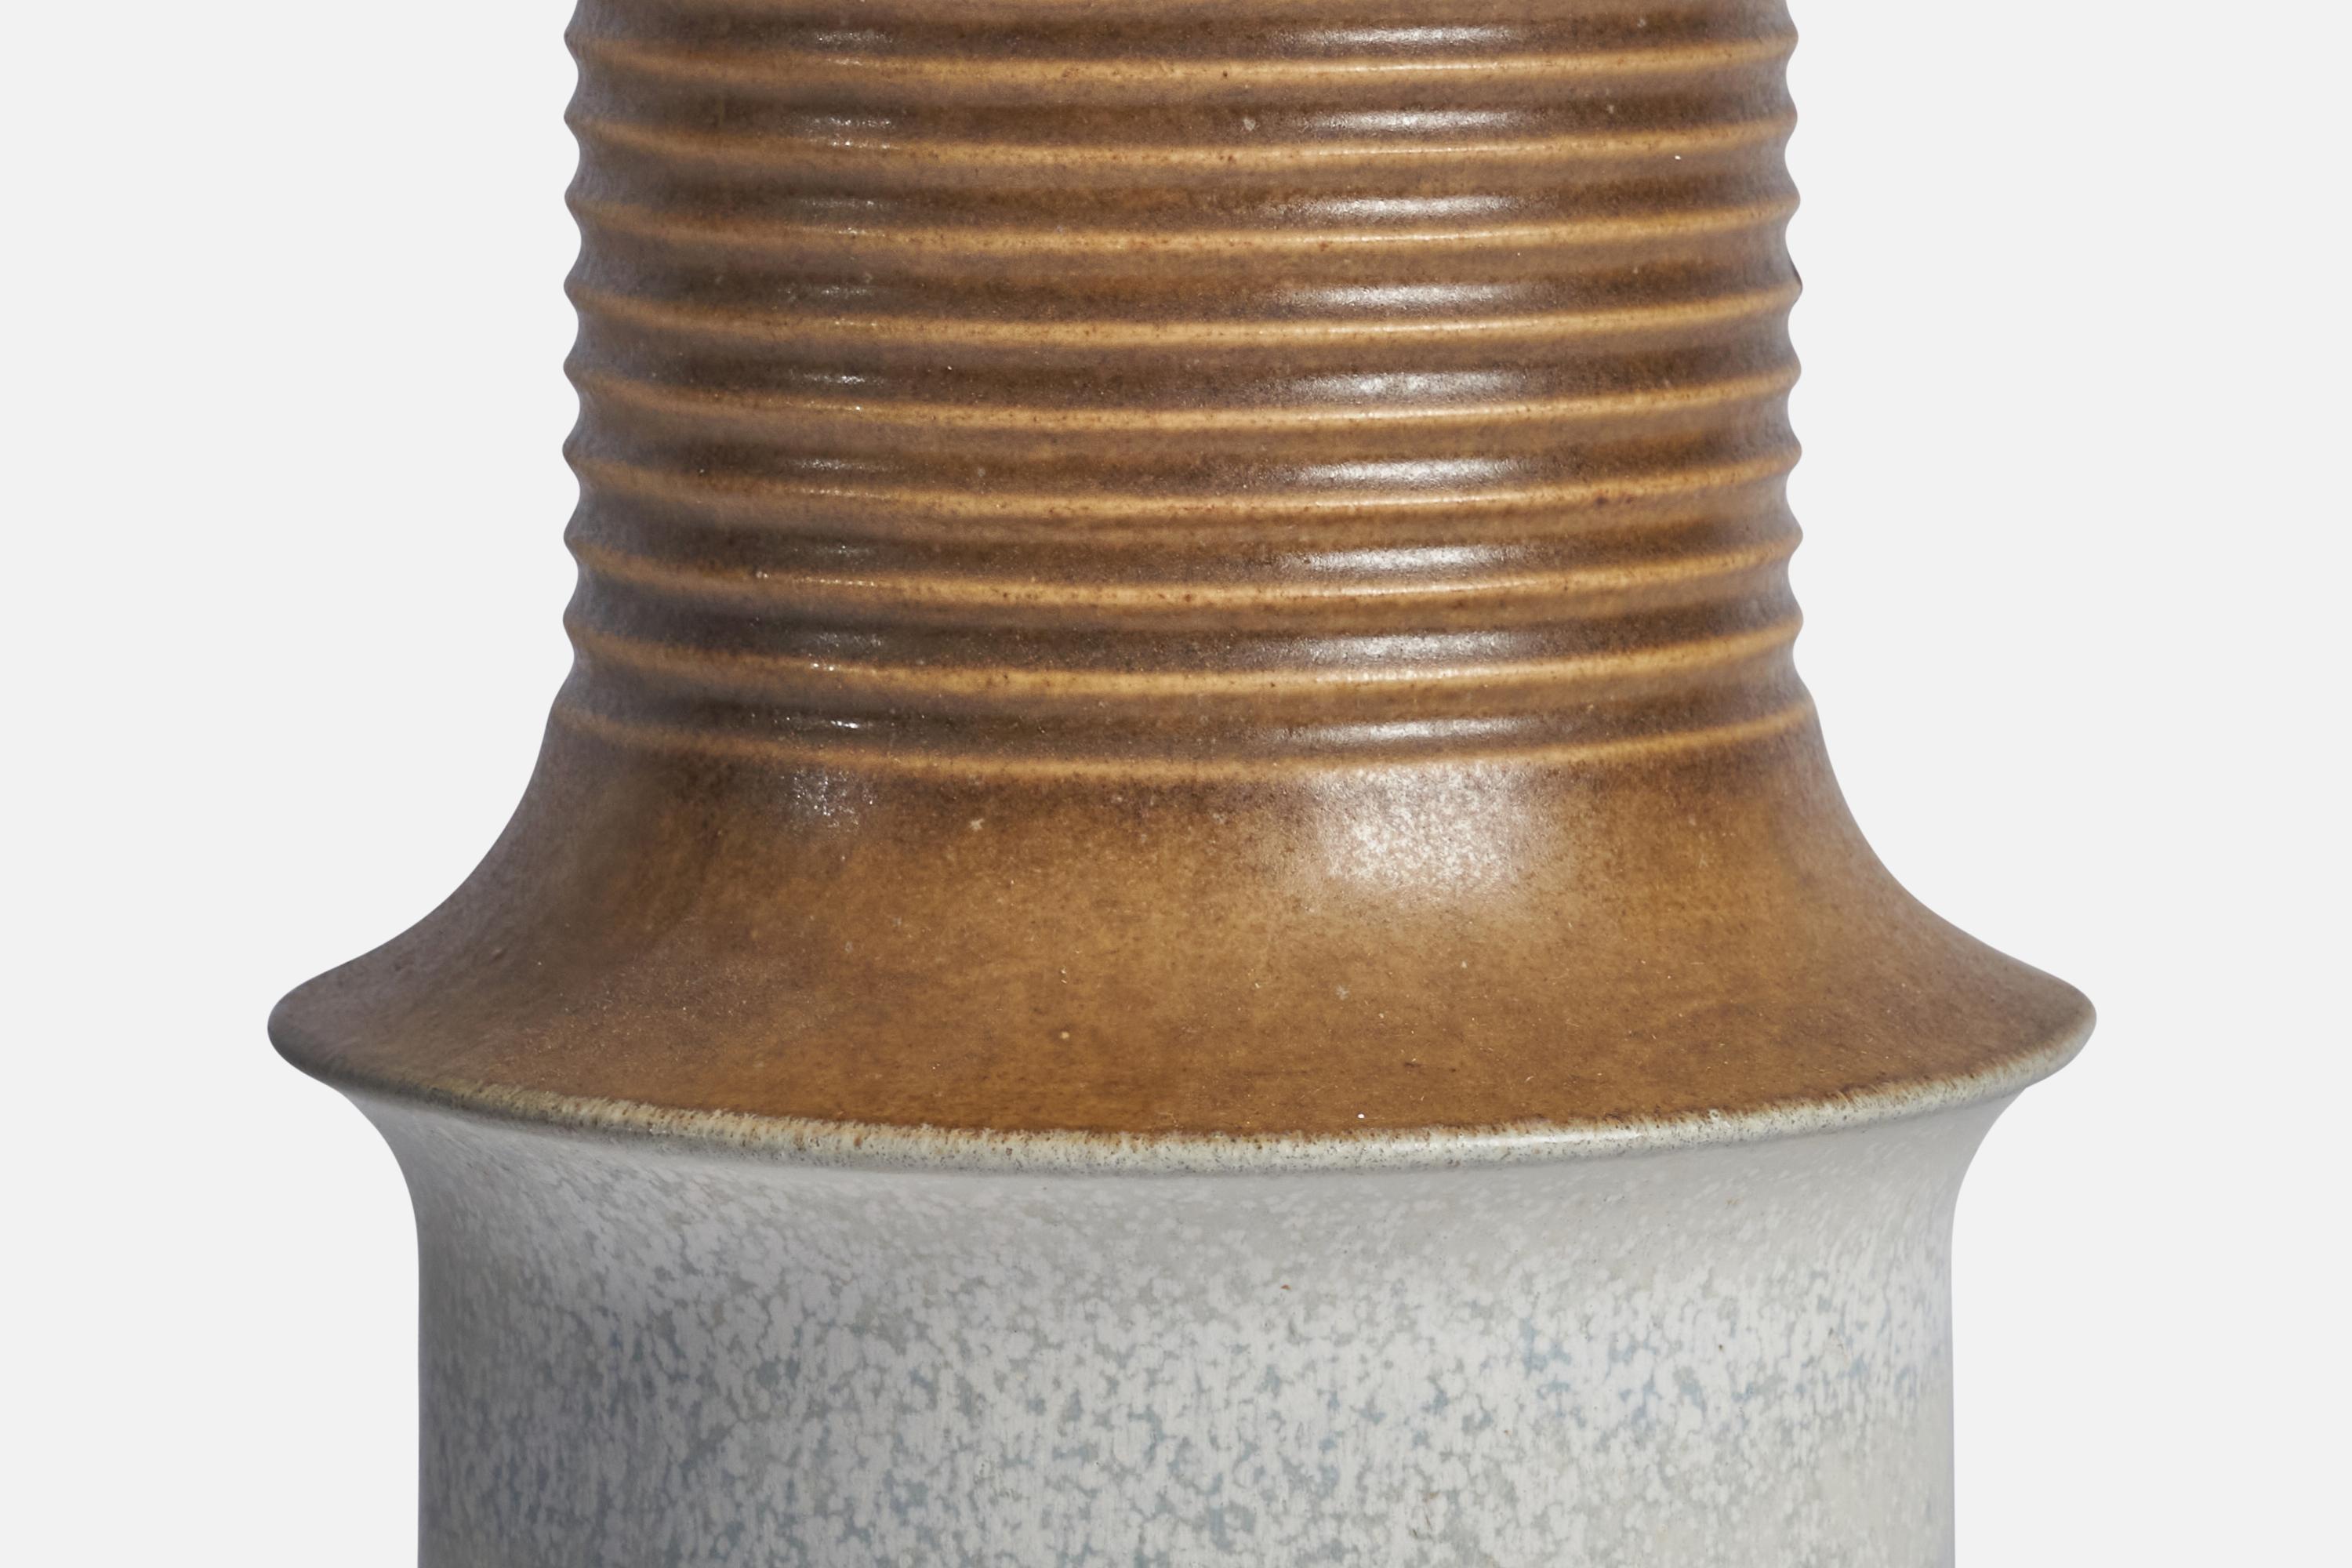 A brown and grey-glazed incised table lamp designed by Bruno Karlsson and produced by Ego Stengods, Sweden, 1960s.

Dimensions of Lamp (inches): 15.5